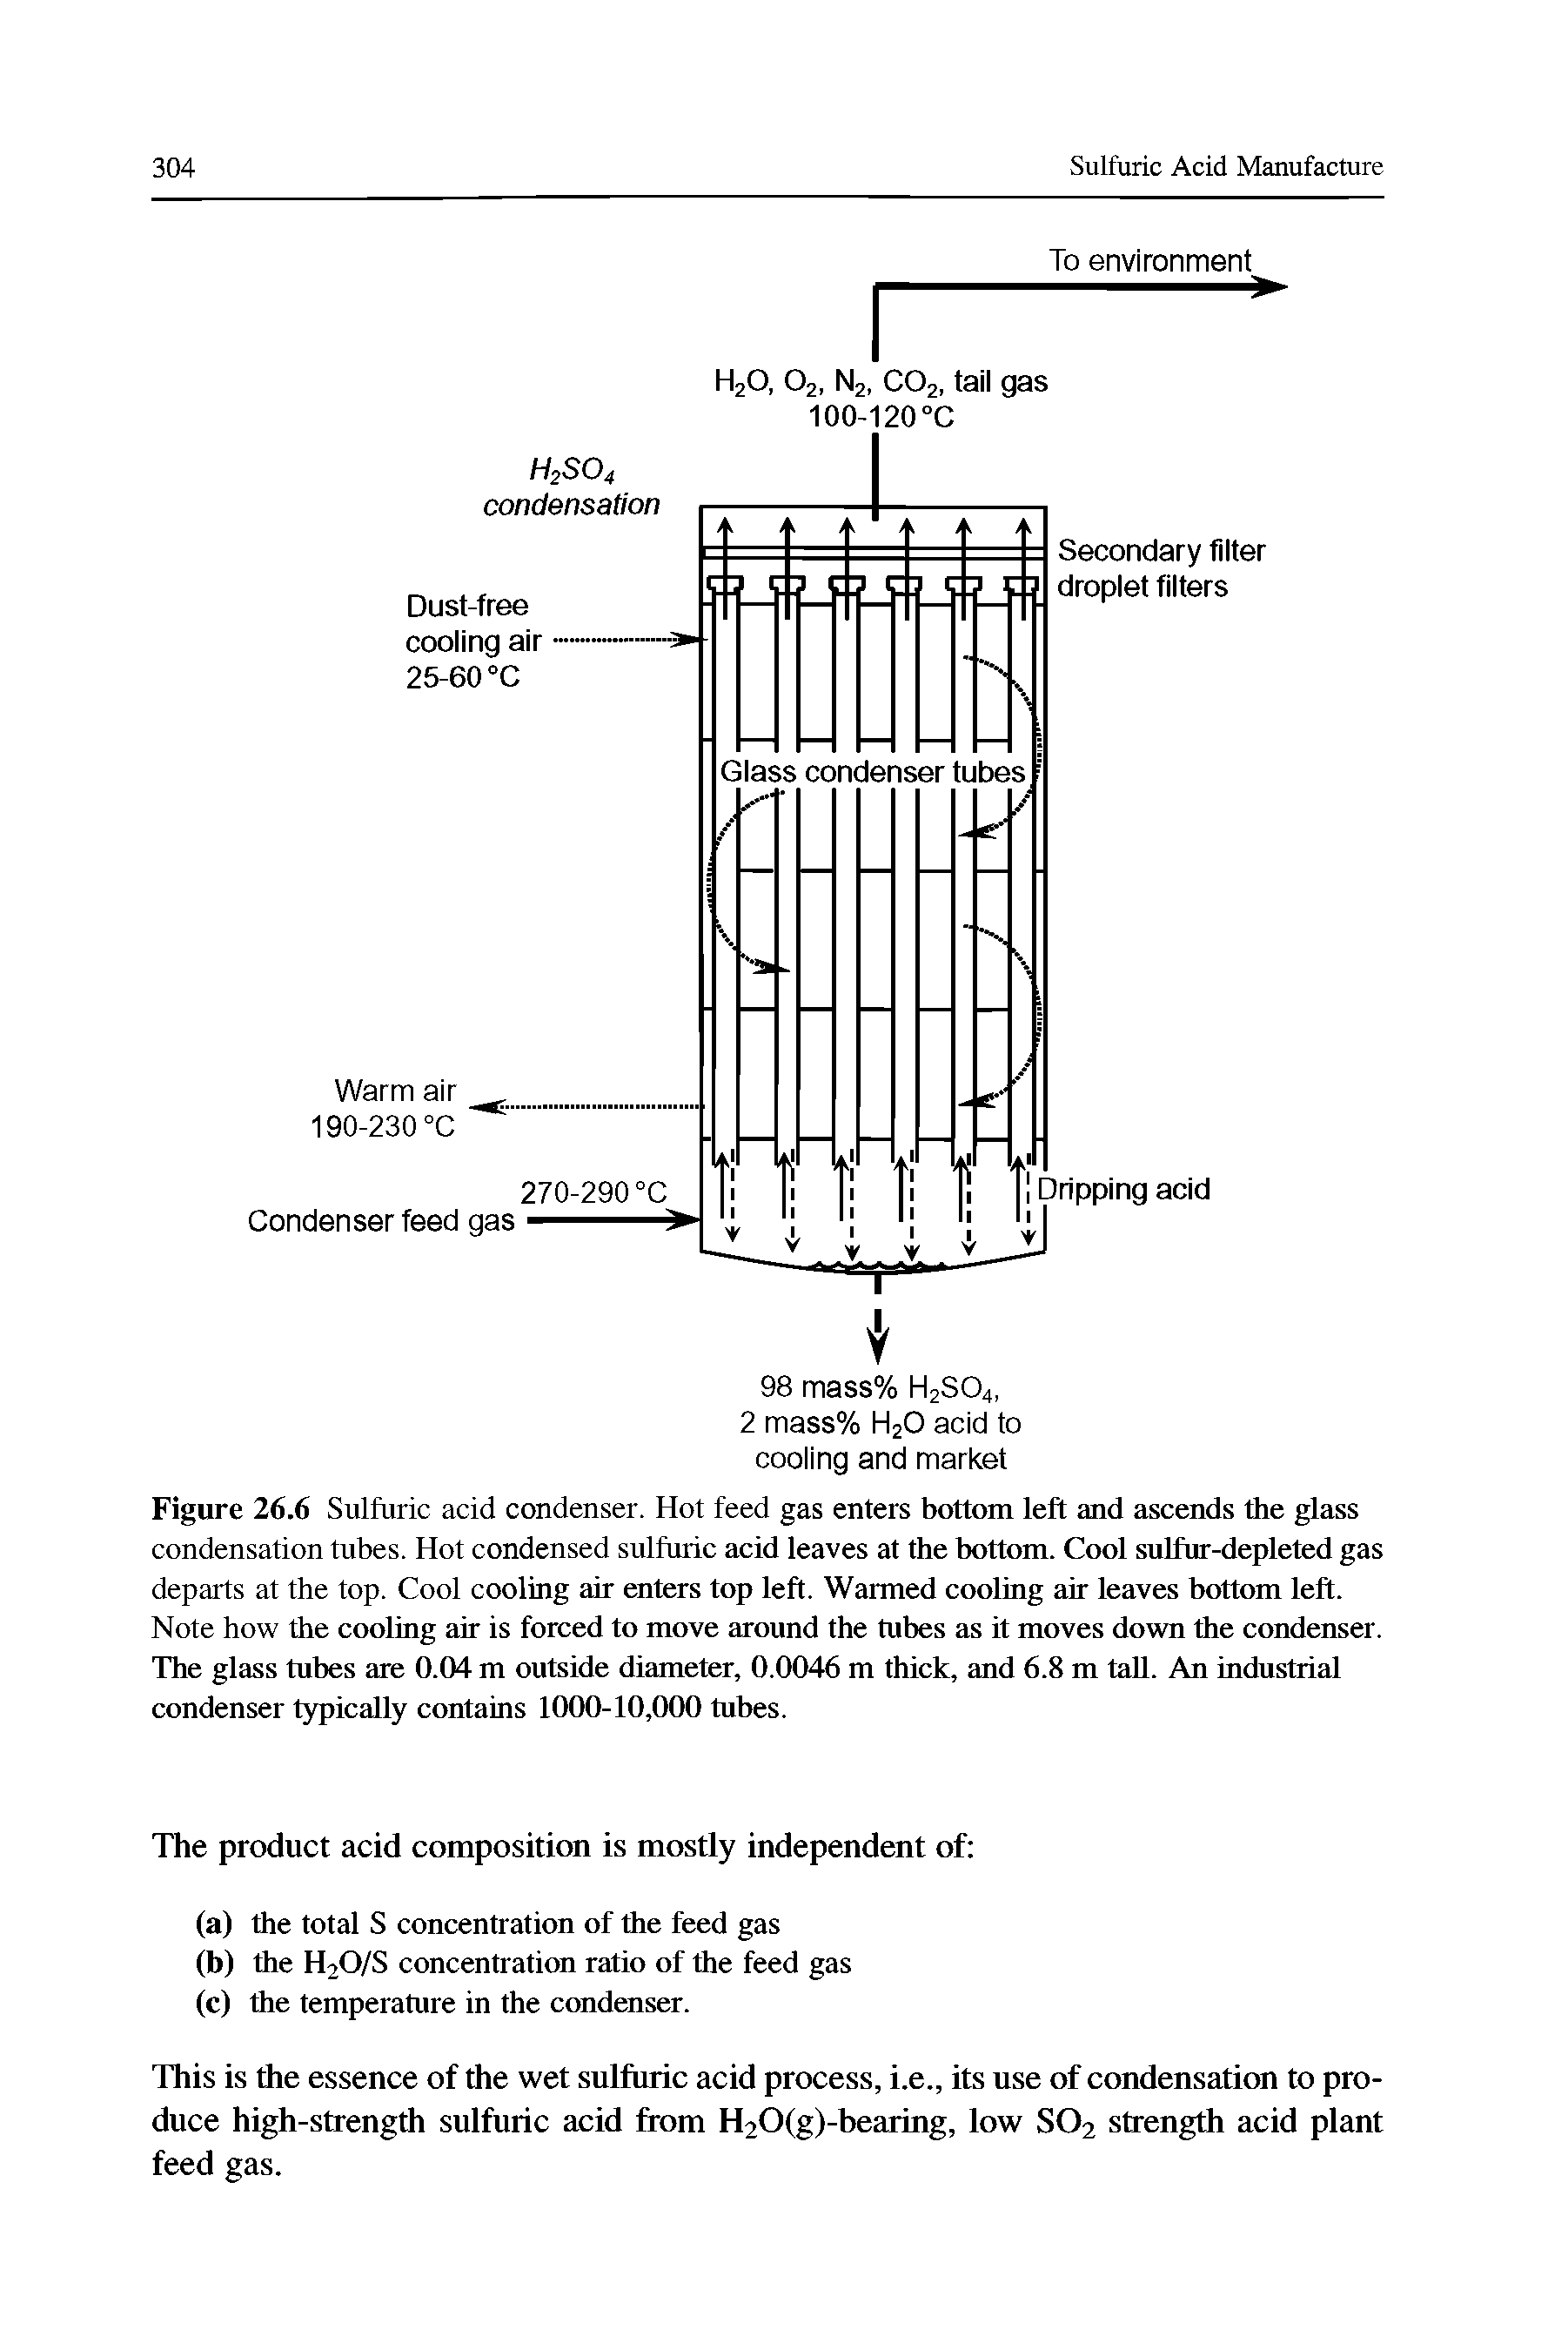 Figure 26.6 Sulfuric acid condenser. Hot feed gas enters bottom left and ascends the glass condensation tubes. Hot condensed sulfuric acid leaves at the bottom. Cool sulfur-depleted gas departs at the top. Cool cooling air ratters top left. Warmed cooftng air leaves bottom left. Note how the cooling air is forced to move around the tubes as it moves down the condenser. The glass tubes are 0.04 m outside diameter, 0.0046 m thick, and 6.8 m taU. An industrial condenser typically contains 1000-10,000 tubes.